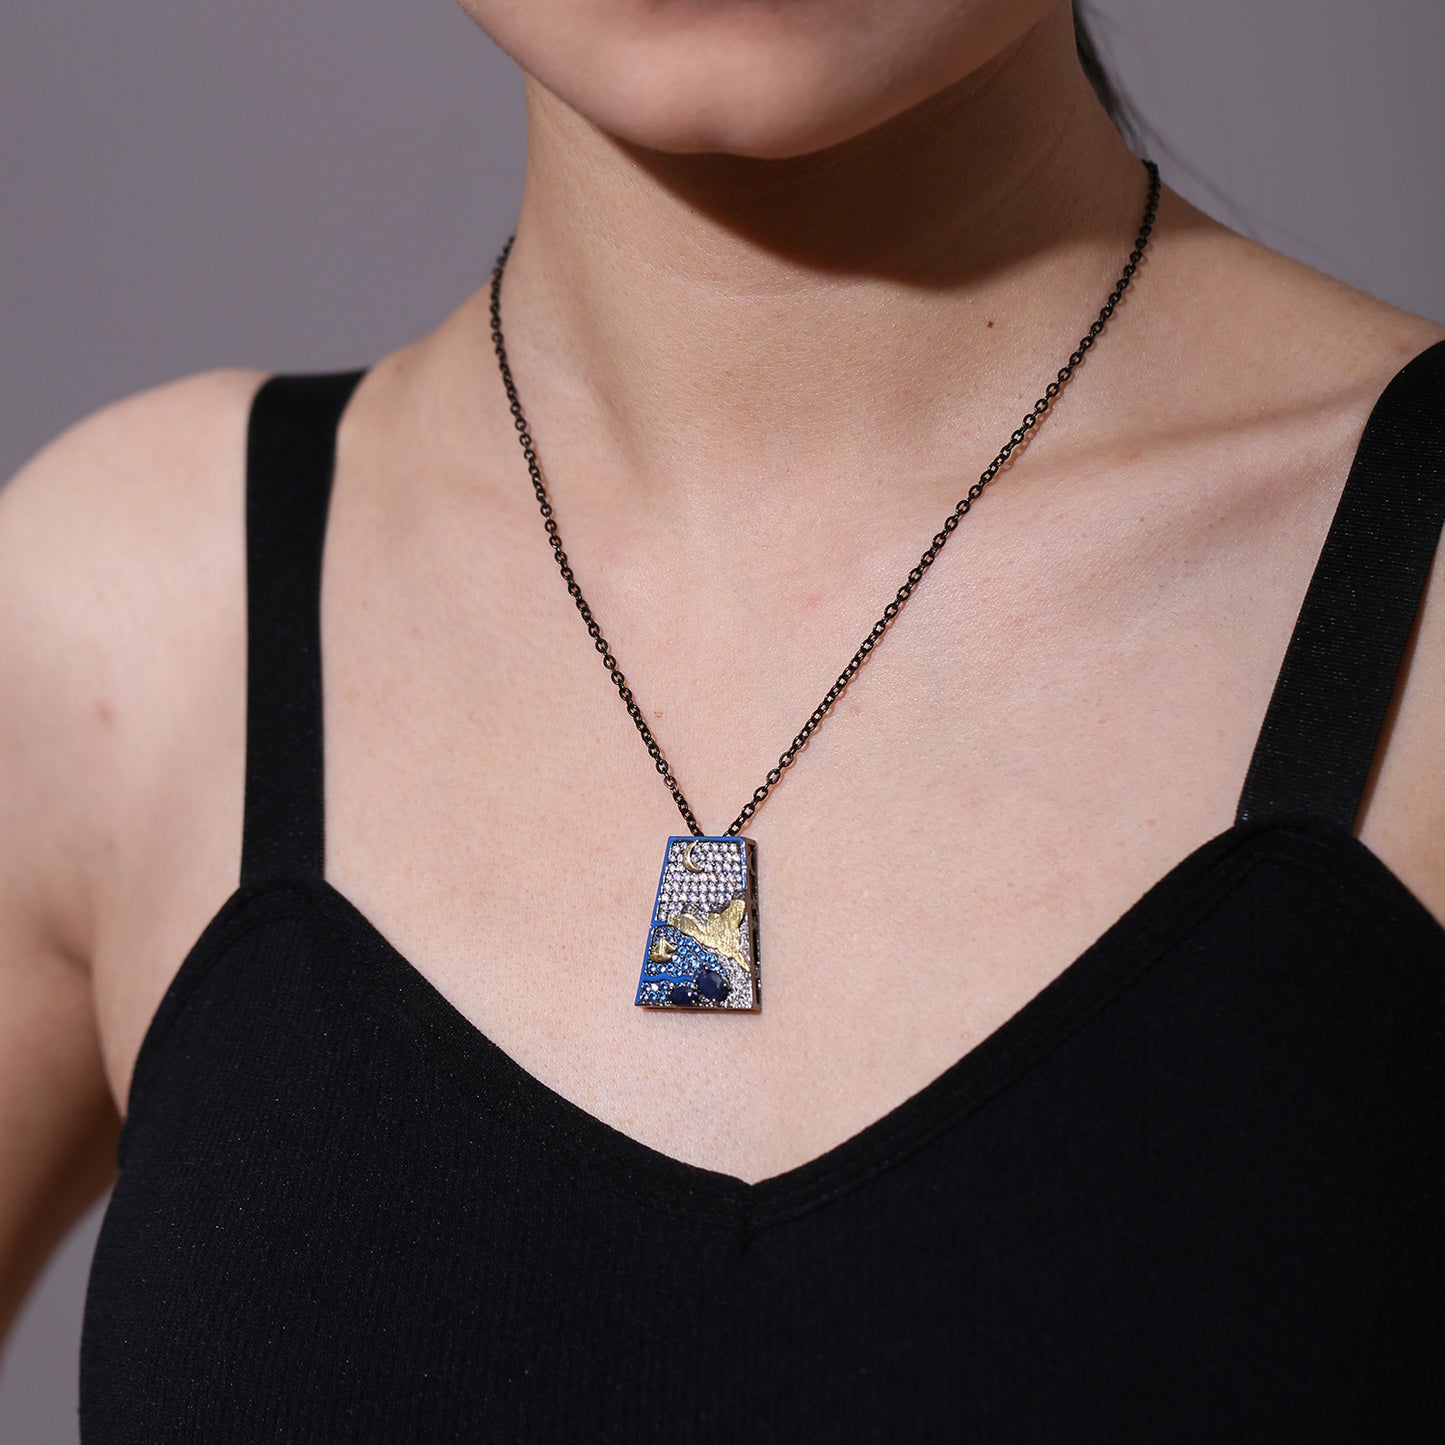 Original Design Inlaid Natural Colourful Gemstone Moonlight Trapezoid Pendant  Silver Necklace for Women